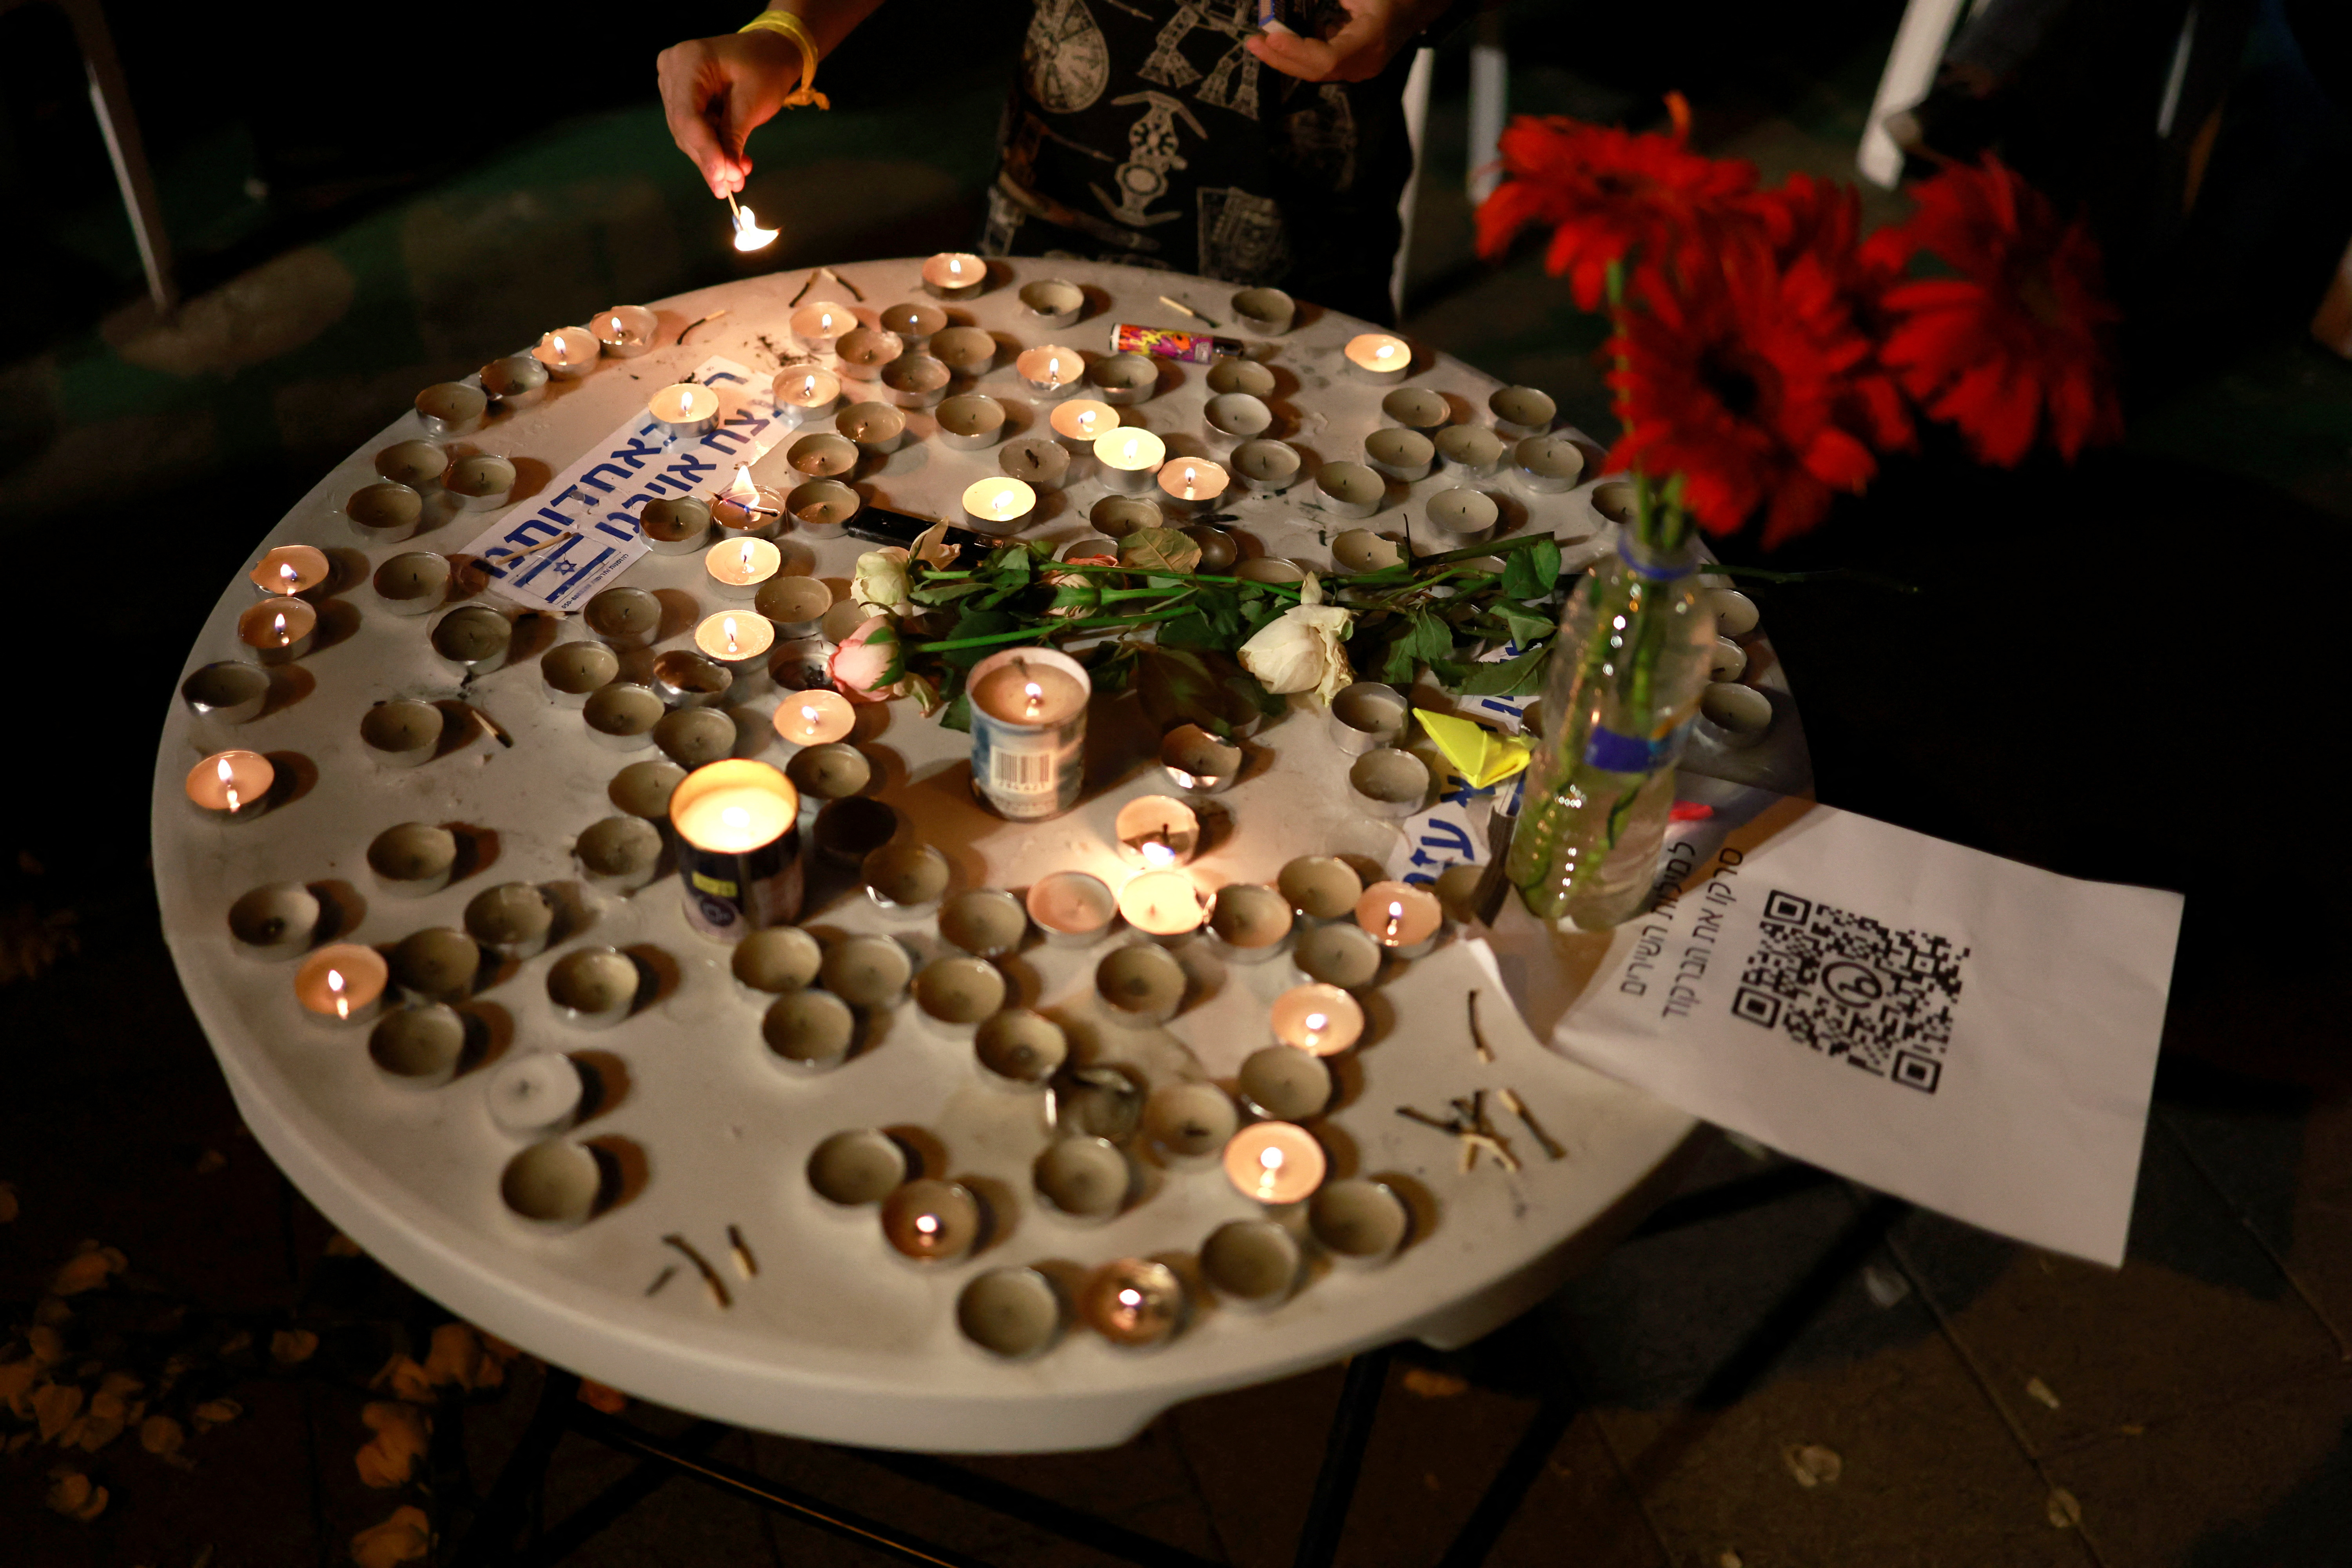 Residents of Tel Aviv show solidarity with the families of hostages and missing people